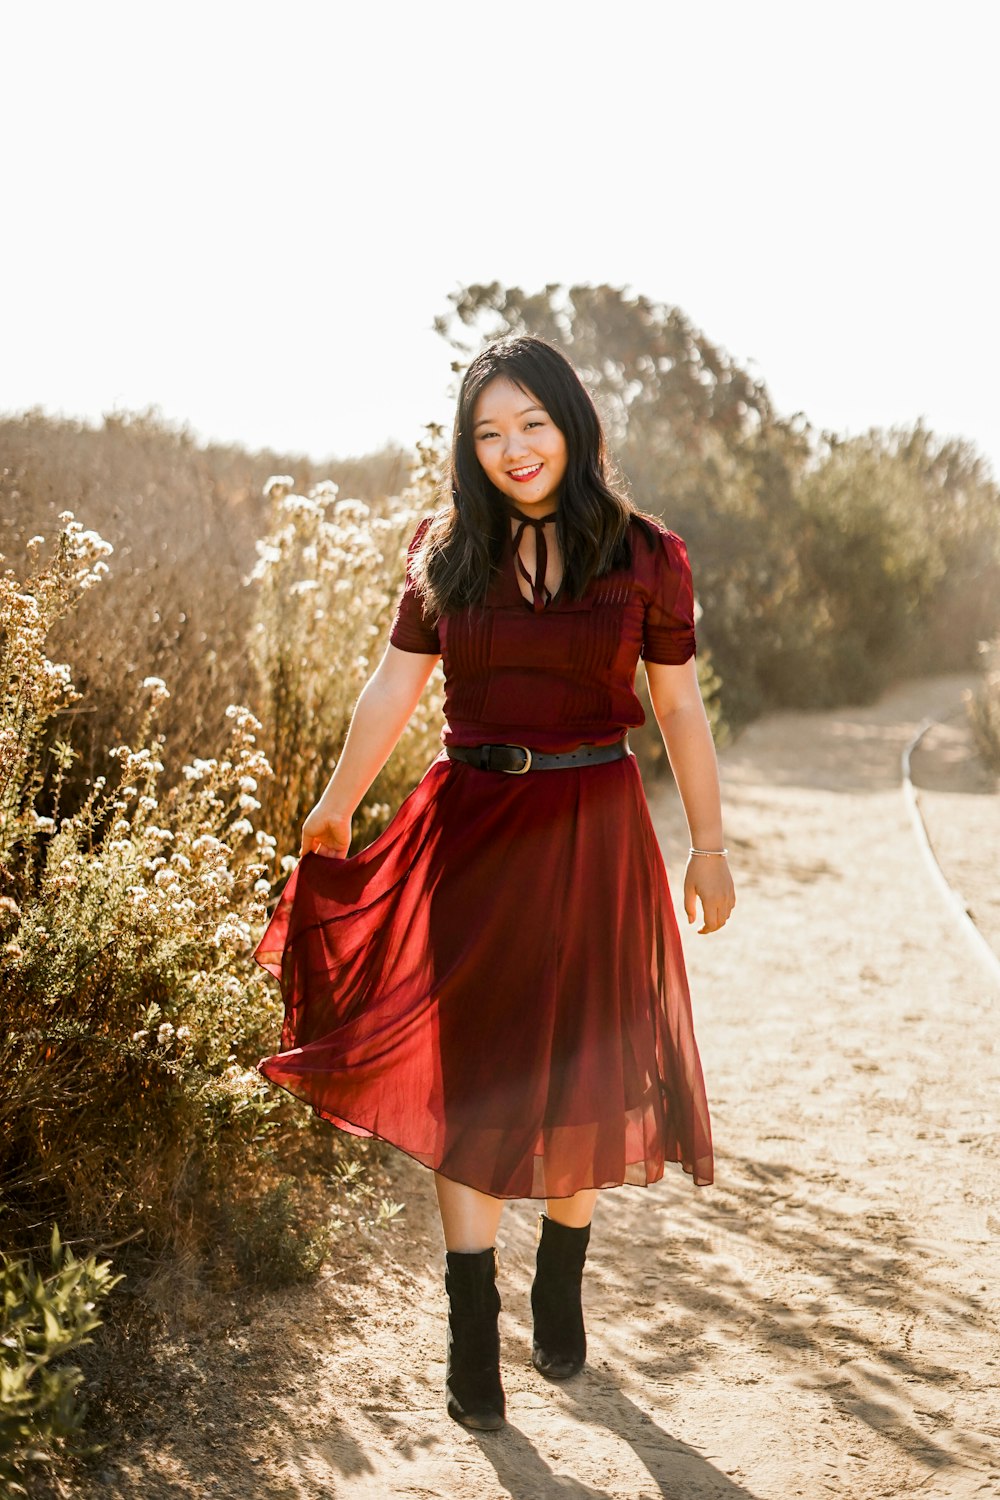 a woman in a red dress walking down a dirt road